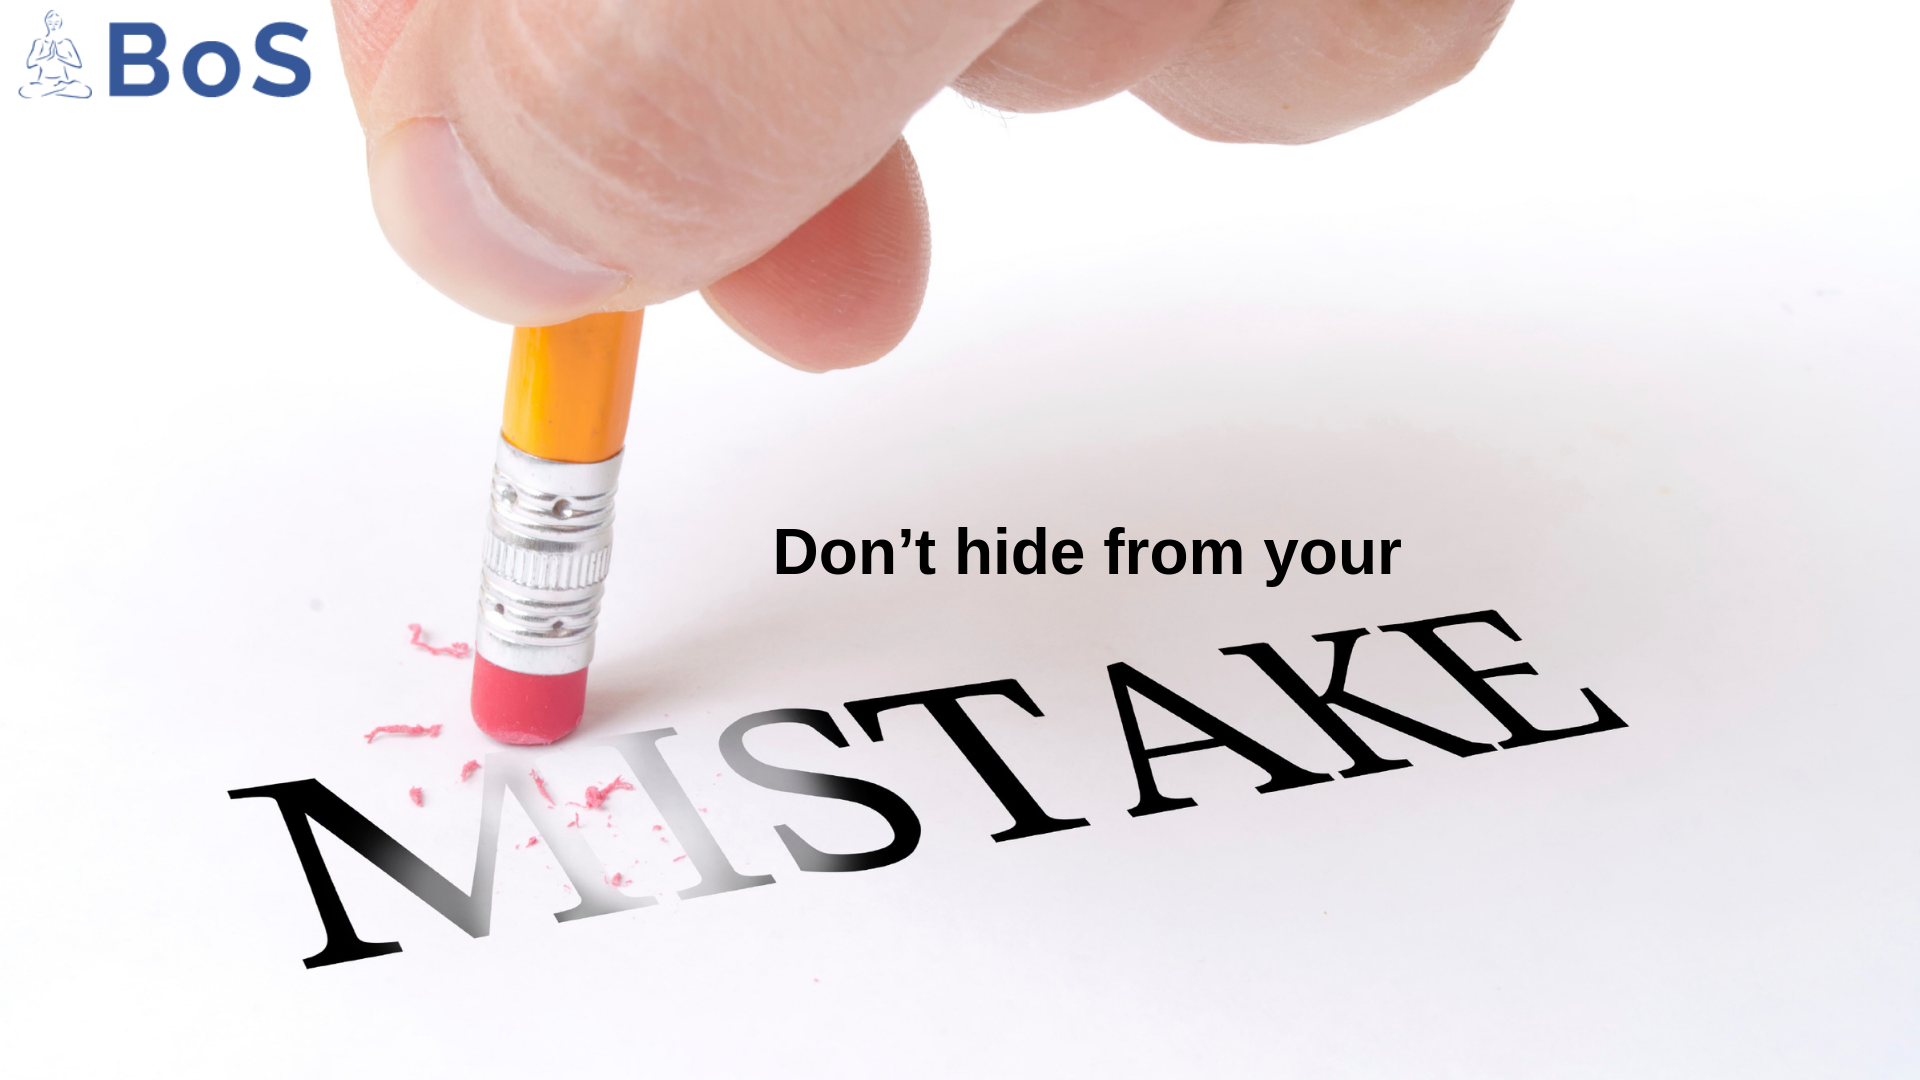 Don’t hide from your mistake